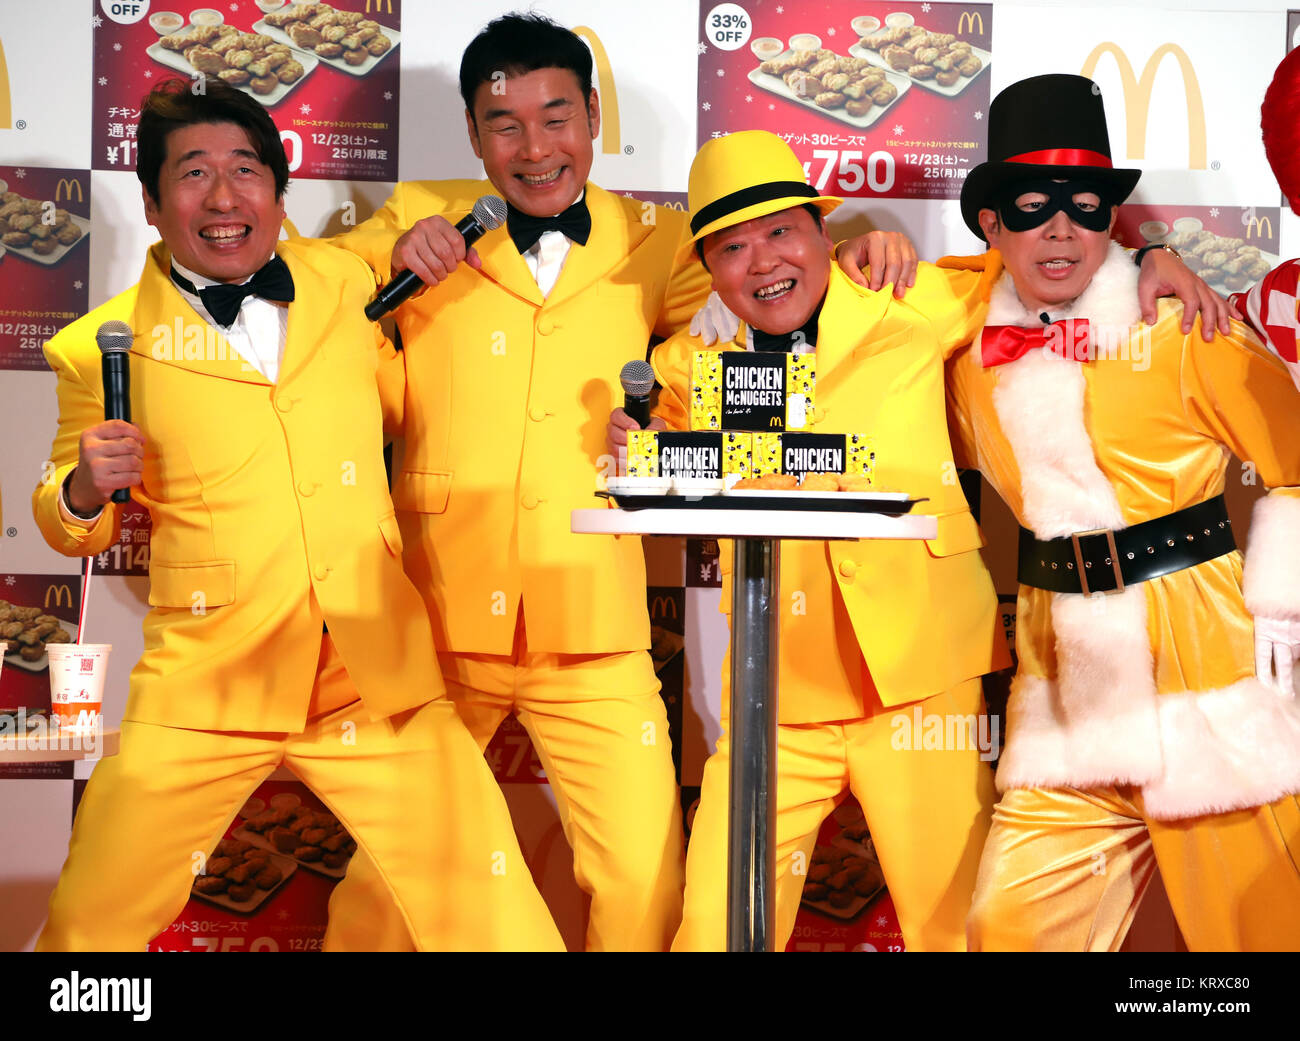 Tokyo, Japan. 21st Dec, 2017. (L-R) Japan's comedy trio Dacho-Club members Jimon Terakado, Katsuhiro Higo, Ryuhei Ueshima and comedian Dandy Sakano attend a promotional event of McDonald's Japan's Chicken McNuggets in Tokyo on Thursday, December 21, 2017. McDonald's Japan will have a campaign for their Chicken McNuggets with a discount price and special flabored dipping saurces. Credit: Yoshio Tsunoda/AFLO/Alamy Live News Stock Photo